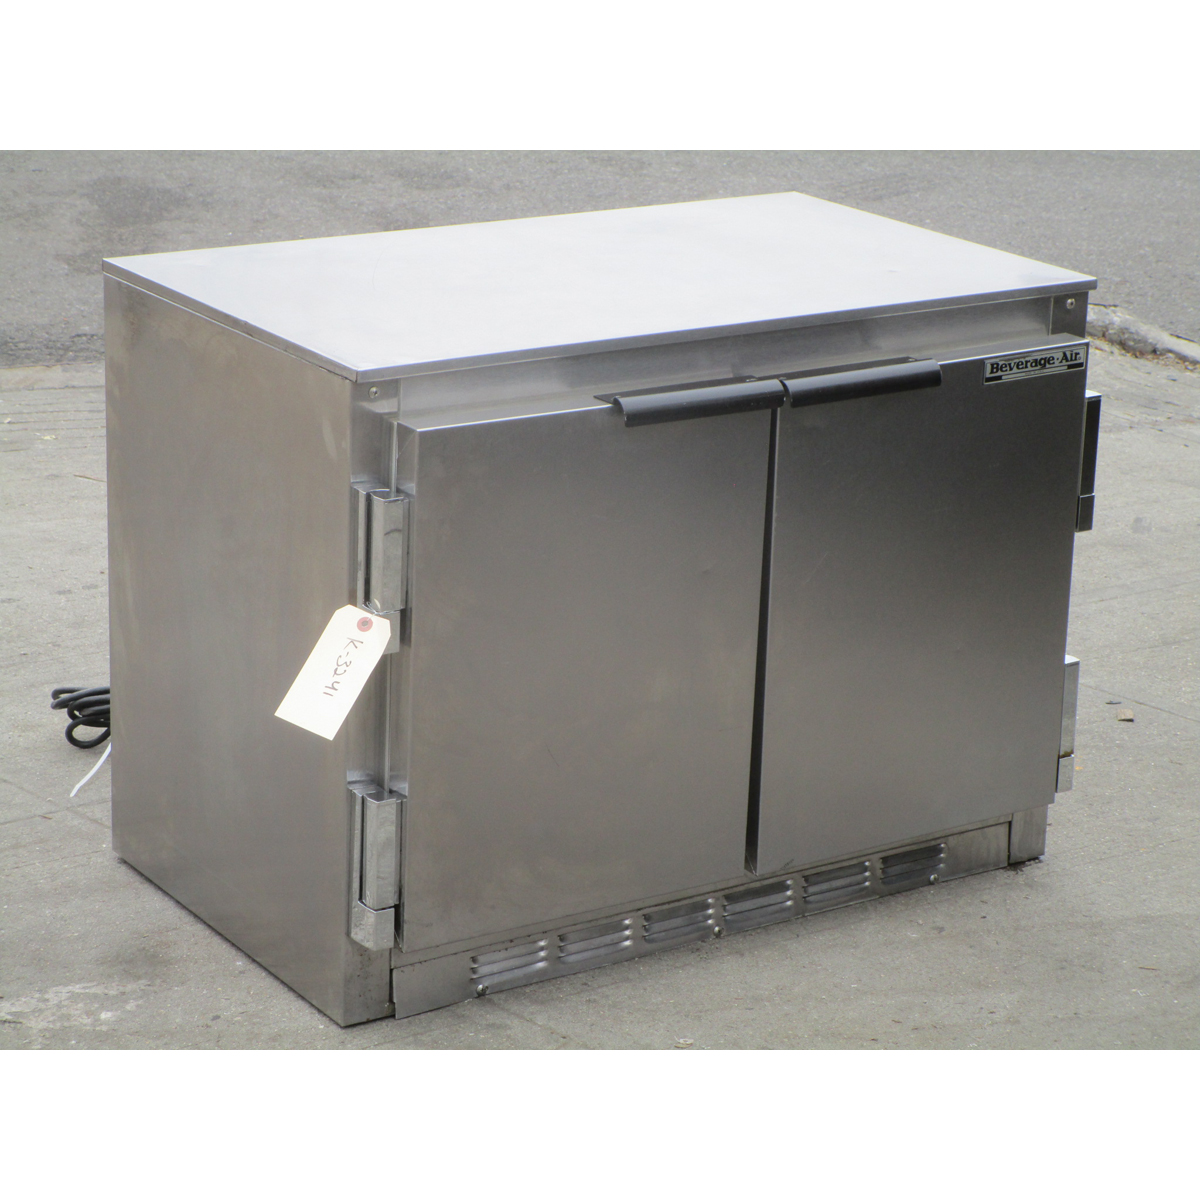 Beverage Air UCR34 34 Inch Undercounter Cooler Refrigerator, Used Excellent Condition image 1